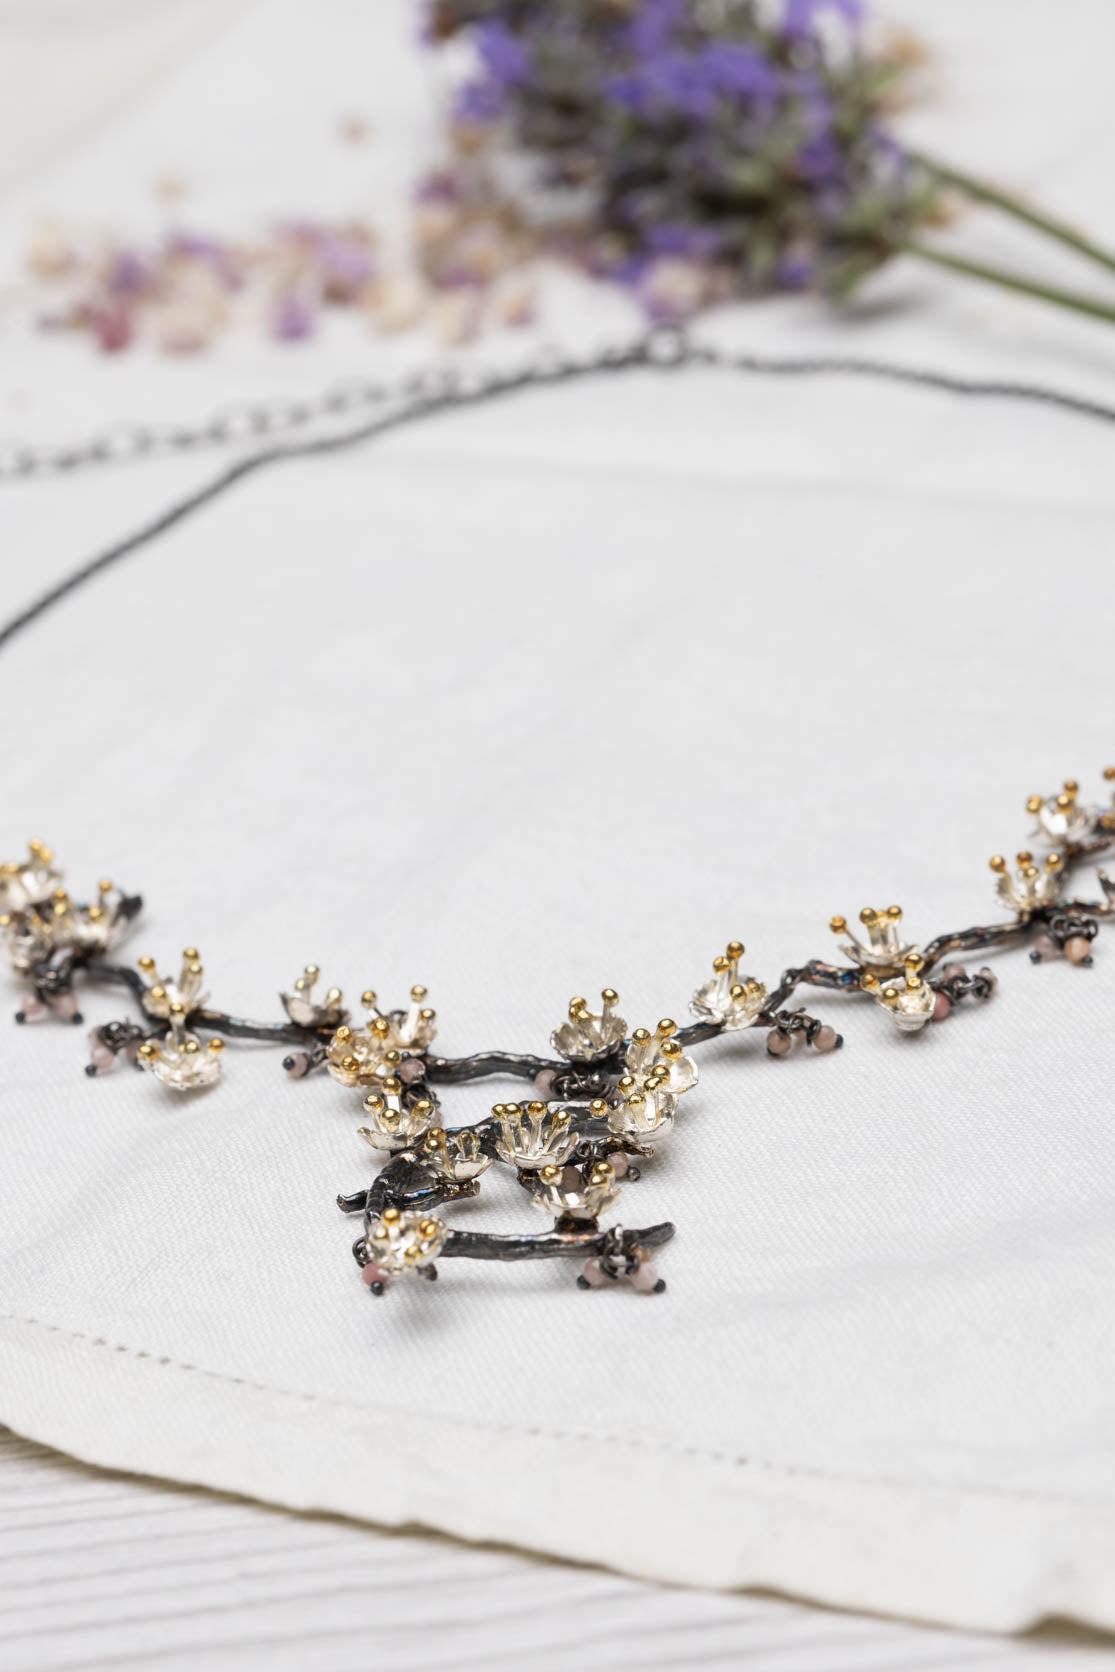 Almond Blossom Statement Necklace in oxidised sterling silver